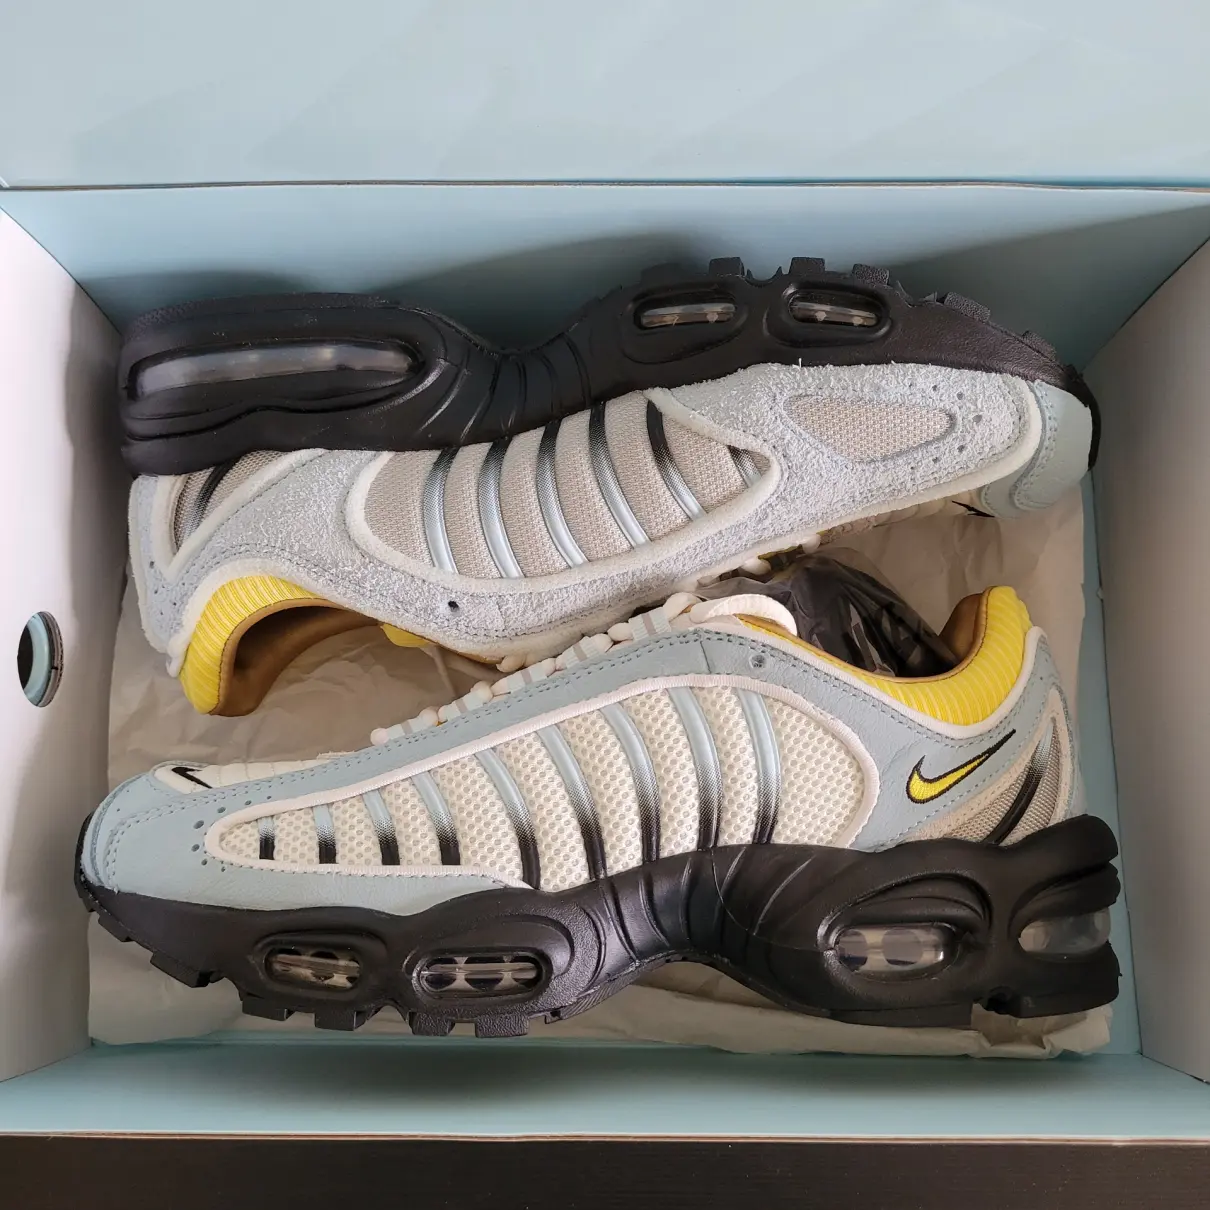 Buy Nike Air Max Tailwind IV low trainers online